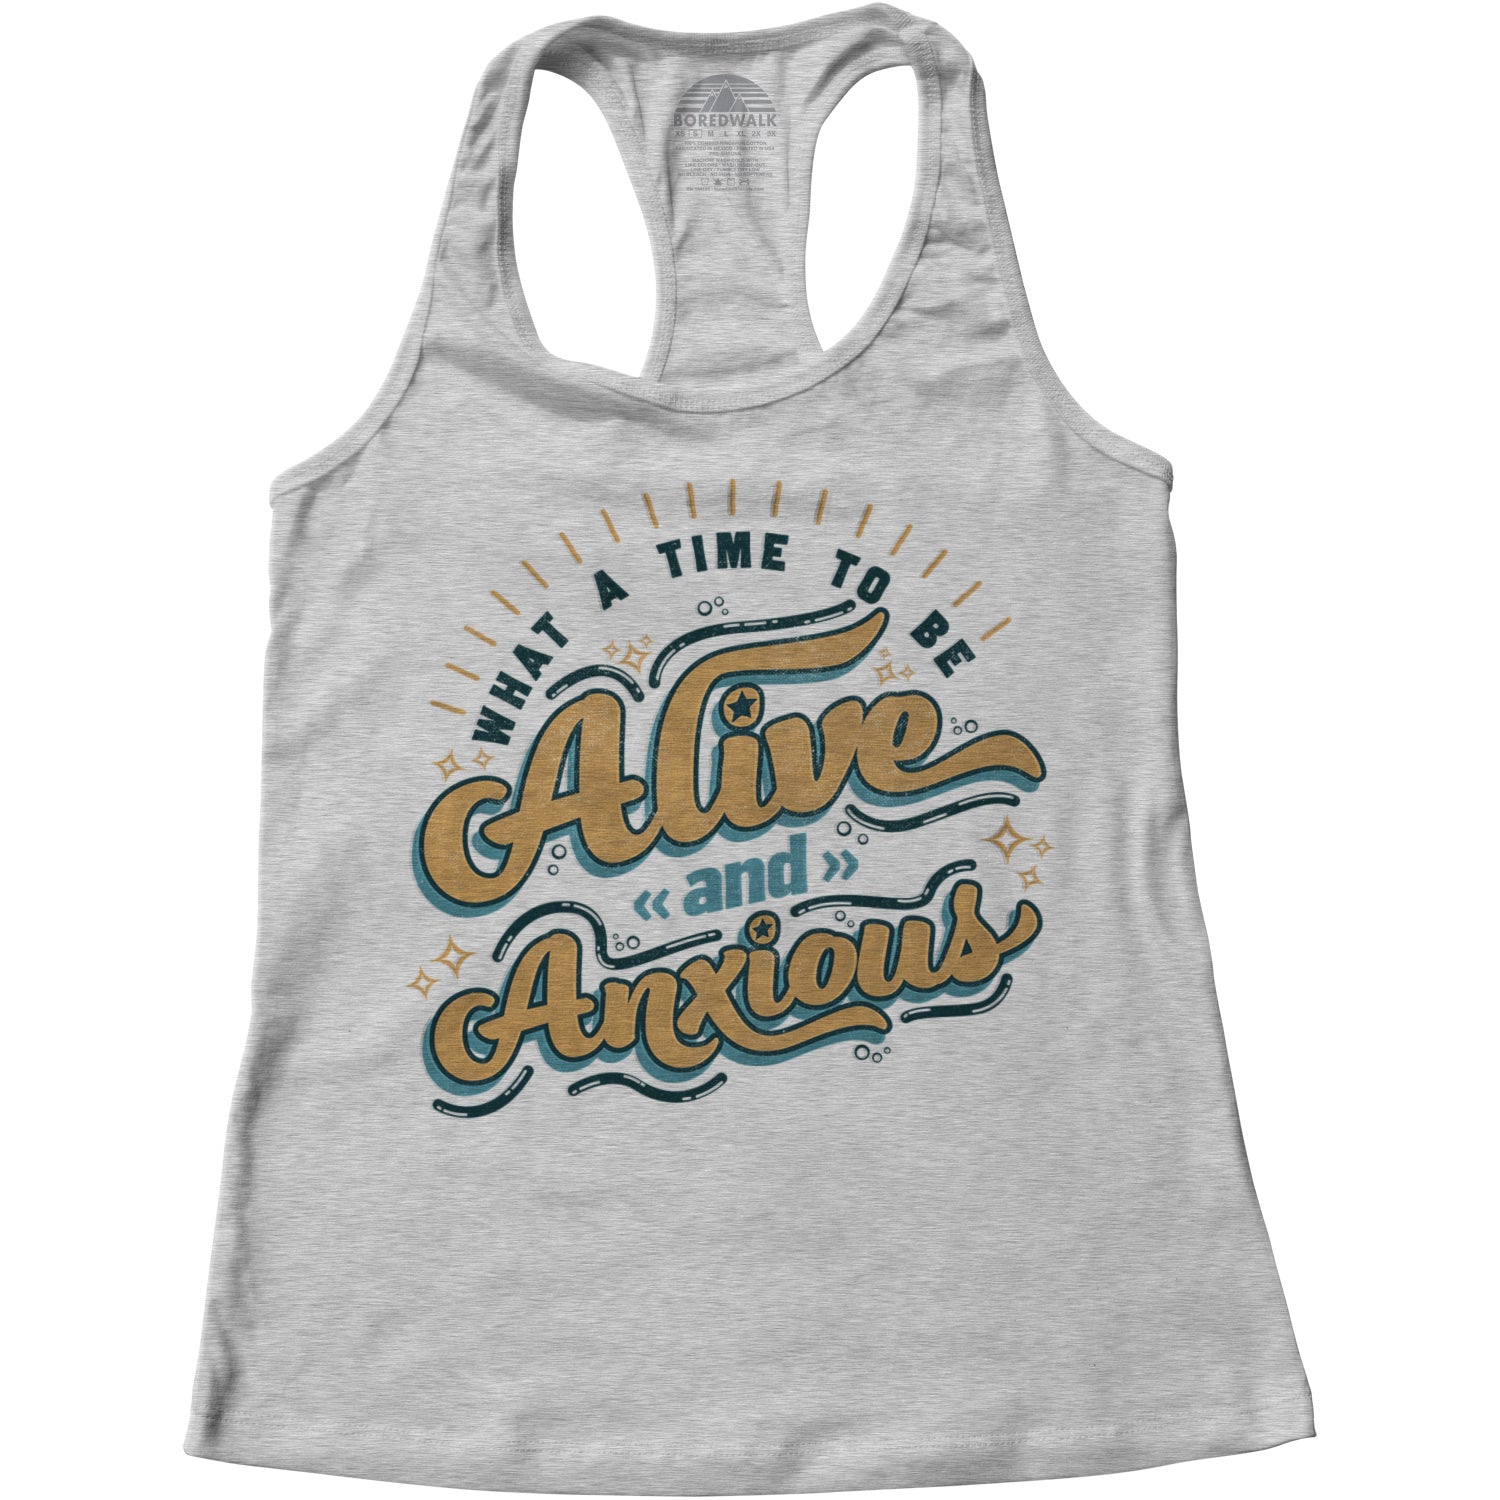 Women's What a Time to be Alive and Anxious Racerback Tank Top